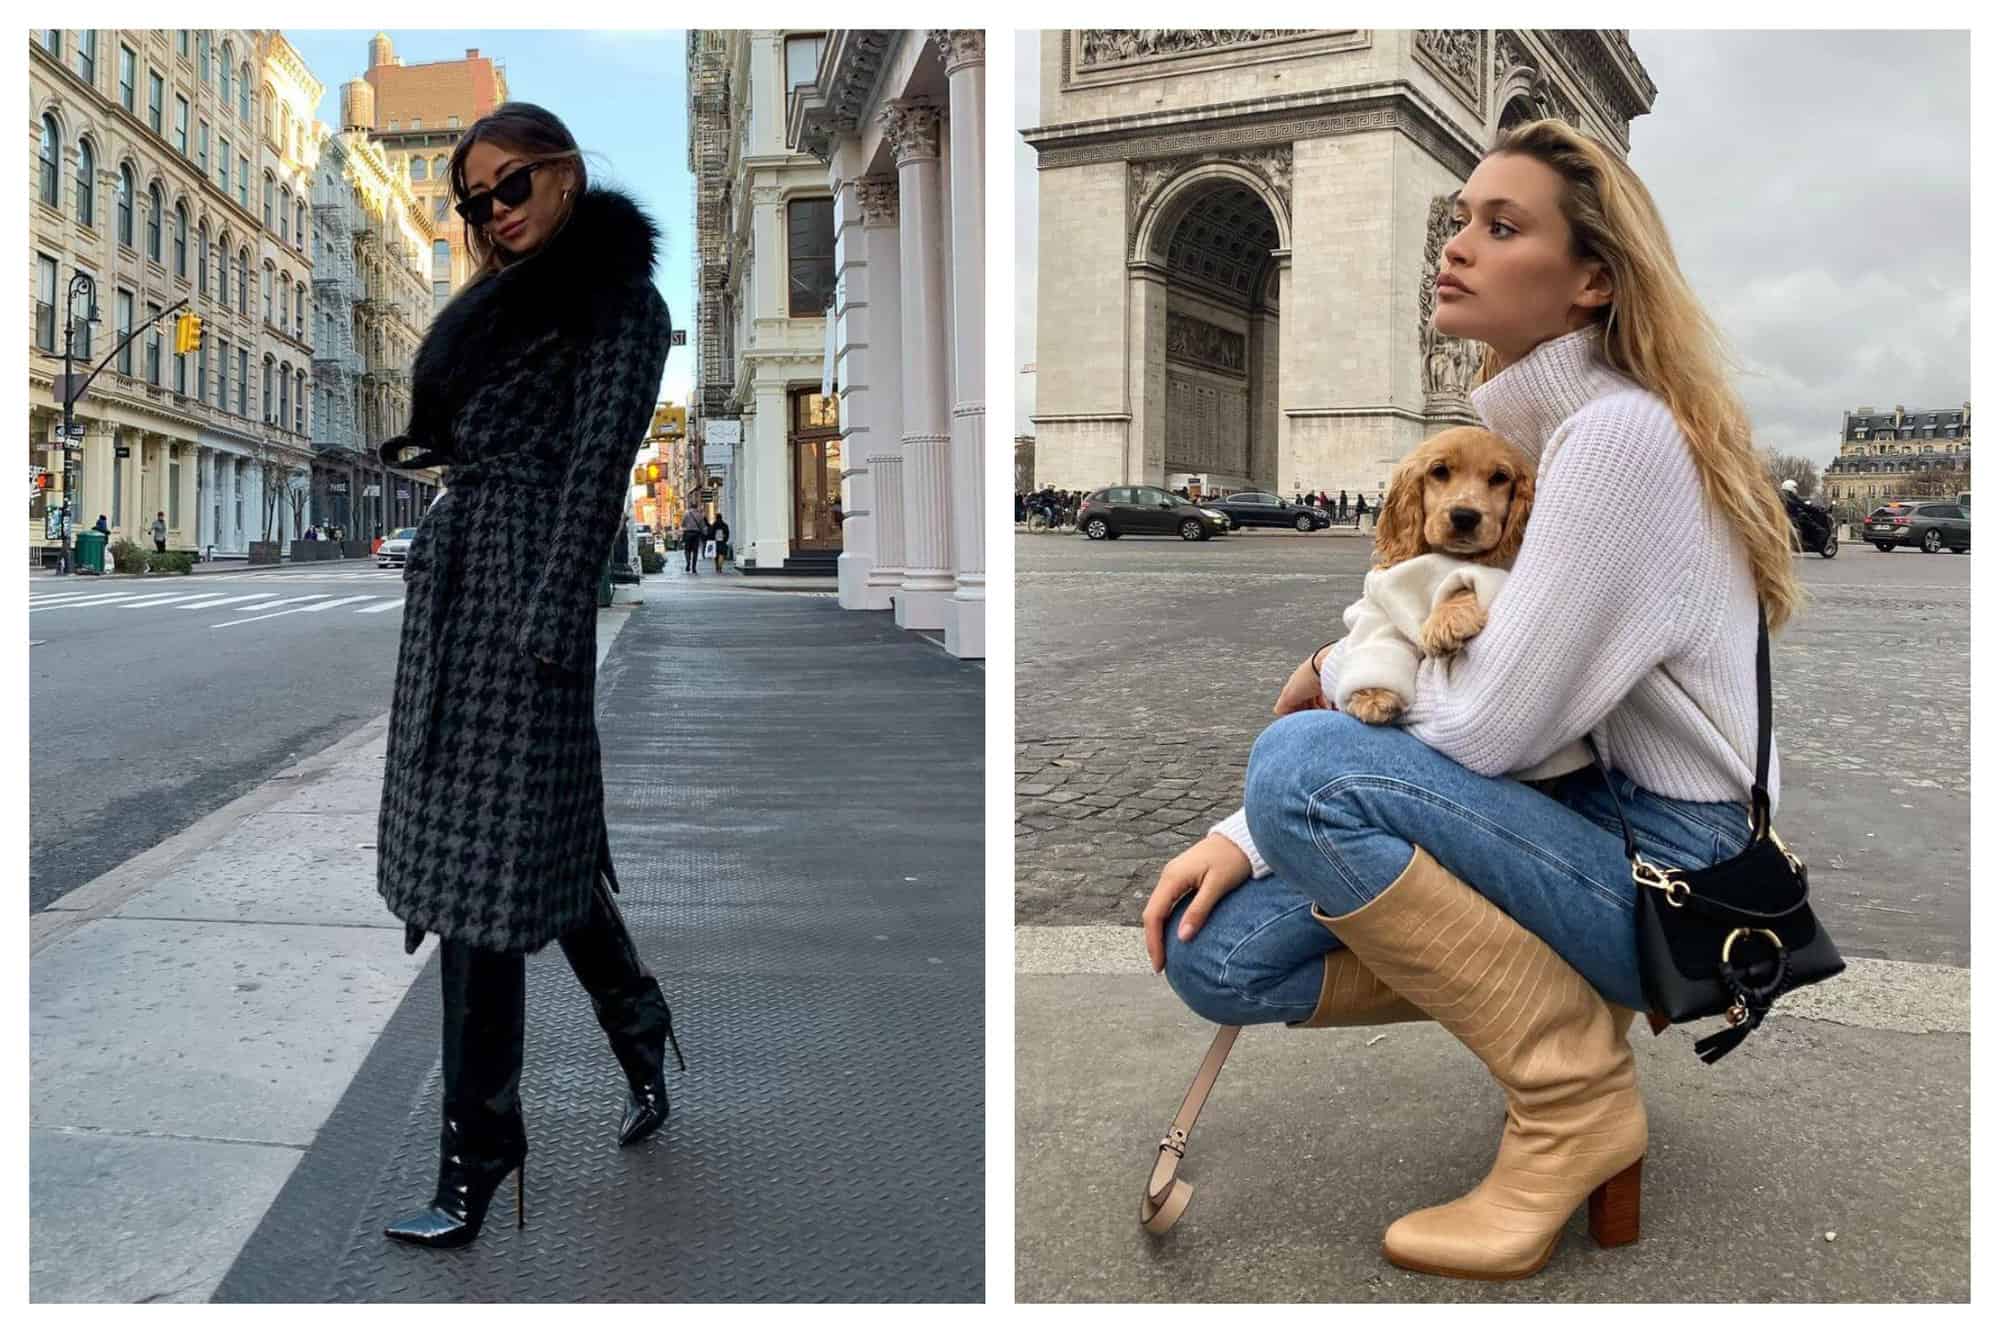 Left: Fashion blogger Bridget is walking in Prince Street in SoHo, Manhattan. She is wearing a pair of black sunnies, a blue-green and black houndstooth plaid coat with black fur collar, and a pair of black leather knee-high boots with 3 inches pointy heels. Right: Fashion blogger Chloe Lecareux is hugging her dog while squatting. The Arc de Triomphe is behind her. She is wearing a white knitted pull, a pair of denim jeans, a small black purse worn across her torso, and a pair of beige crocodile leather boots. Her boots have 2 inches blocked heels. Her dog appears to wear a white type of shirt to match her.